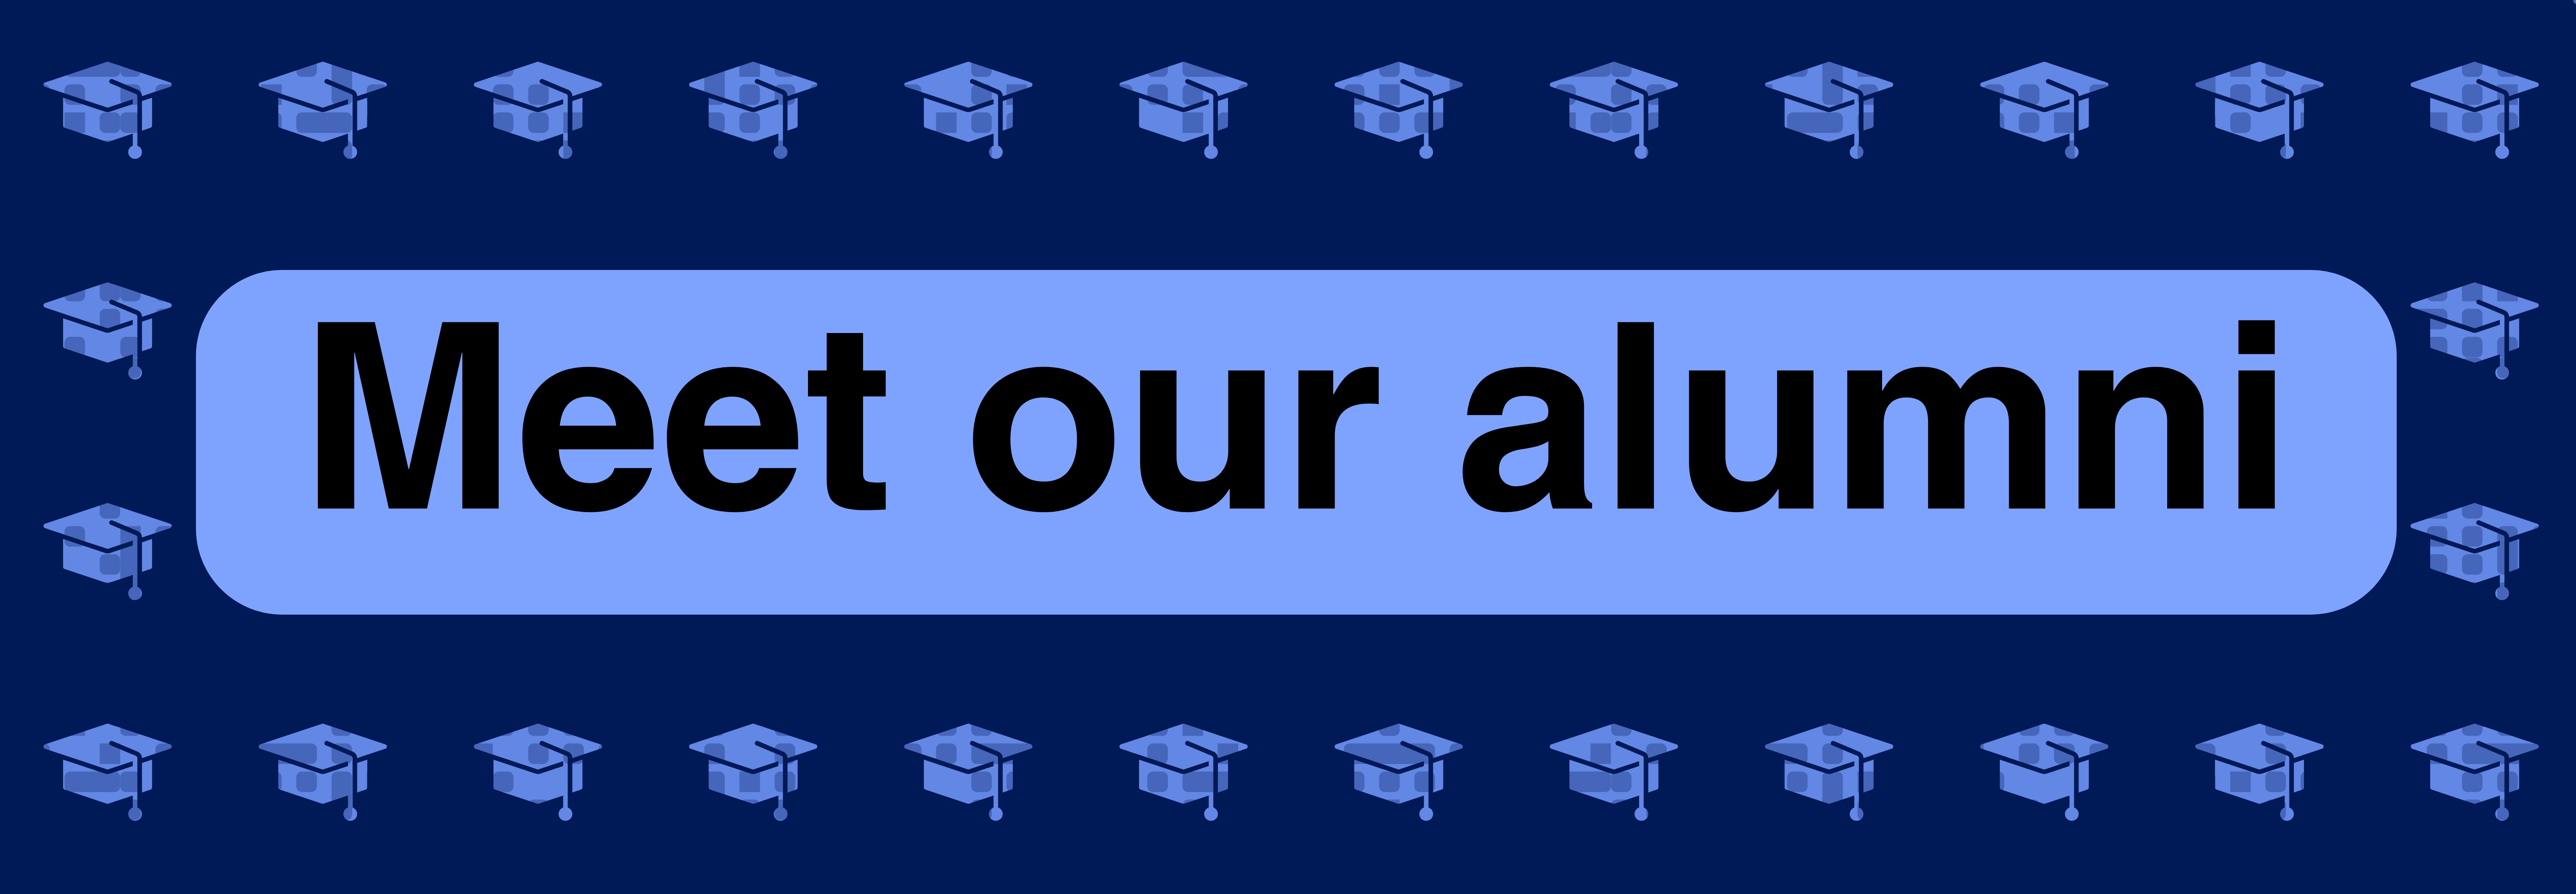 Blue graphic with mortar boards and the words 'Meet our alumni'.